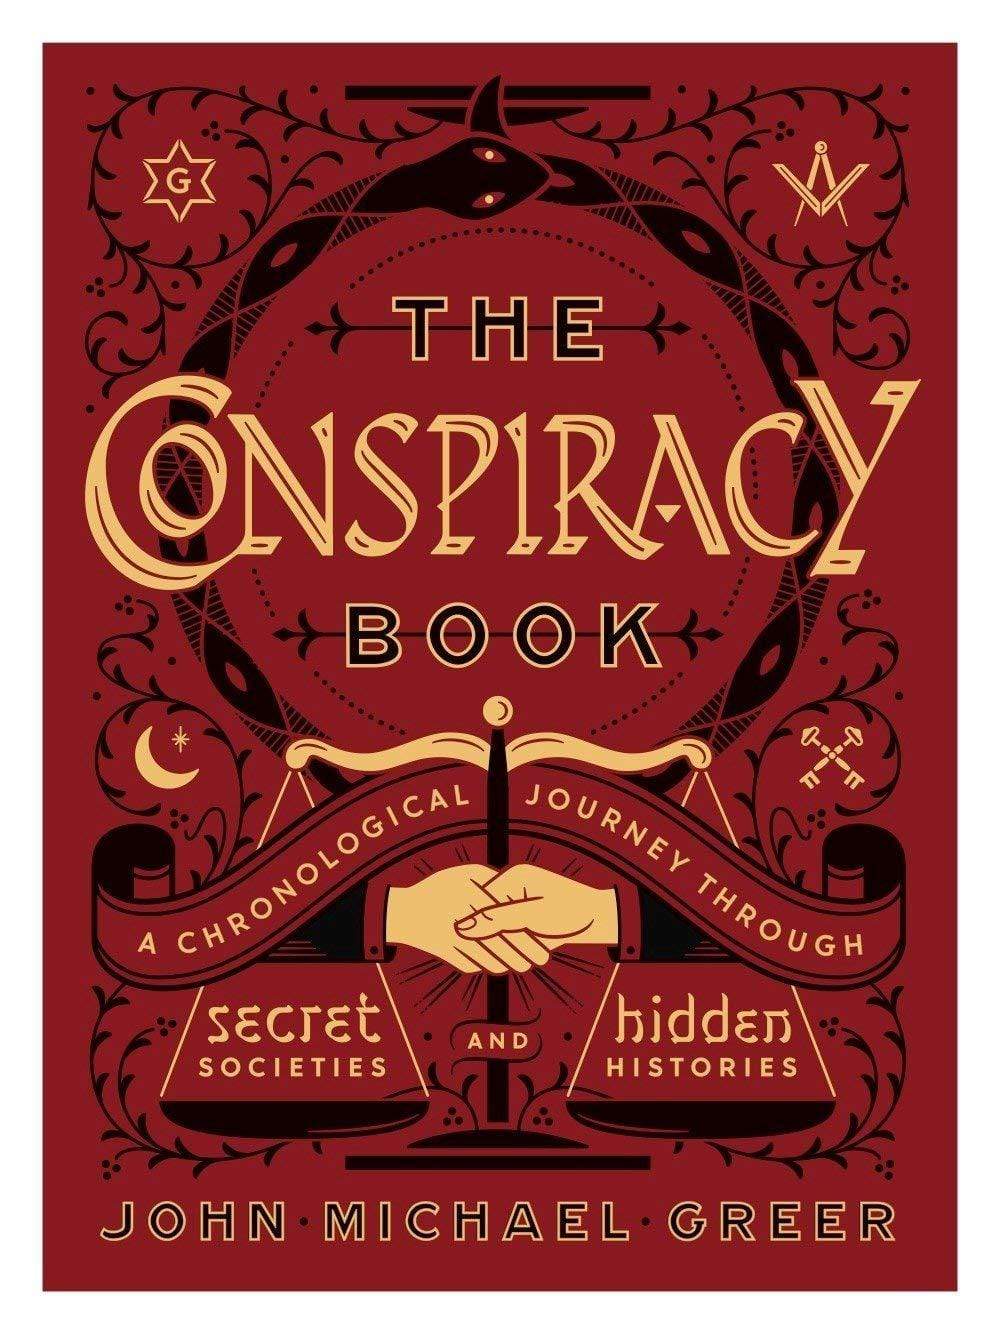 The Conspiracy Book by John Michael Greer